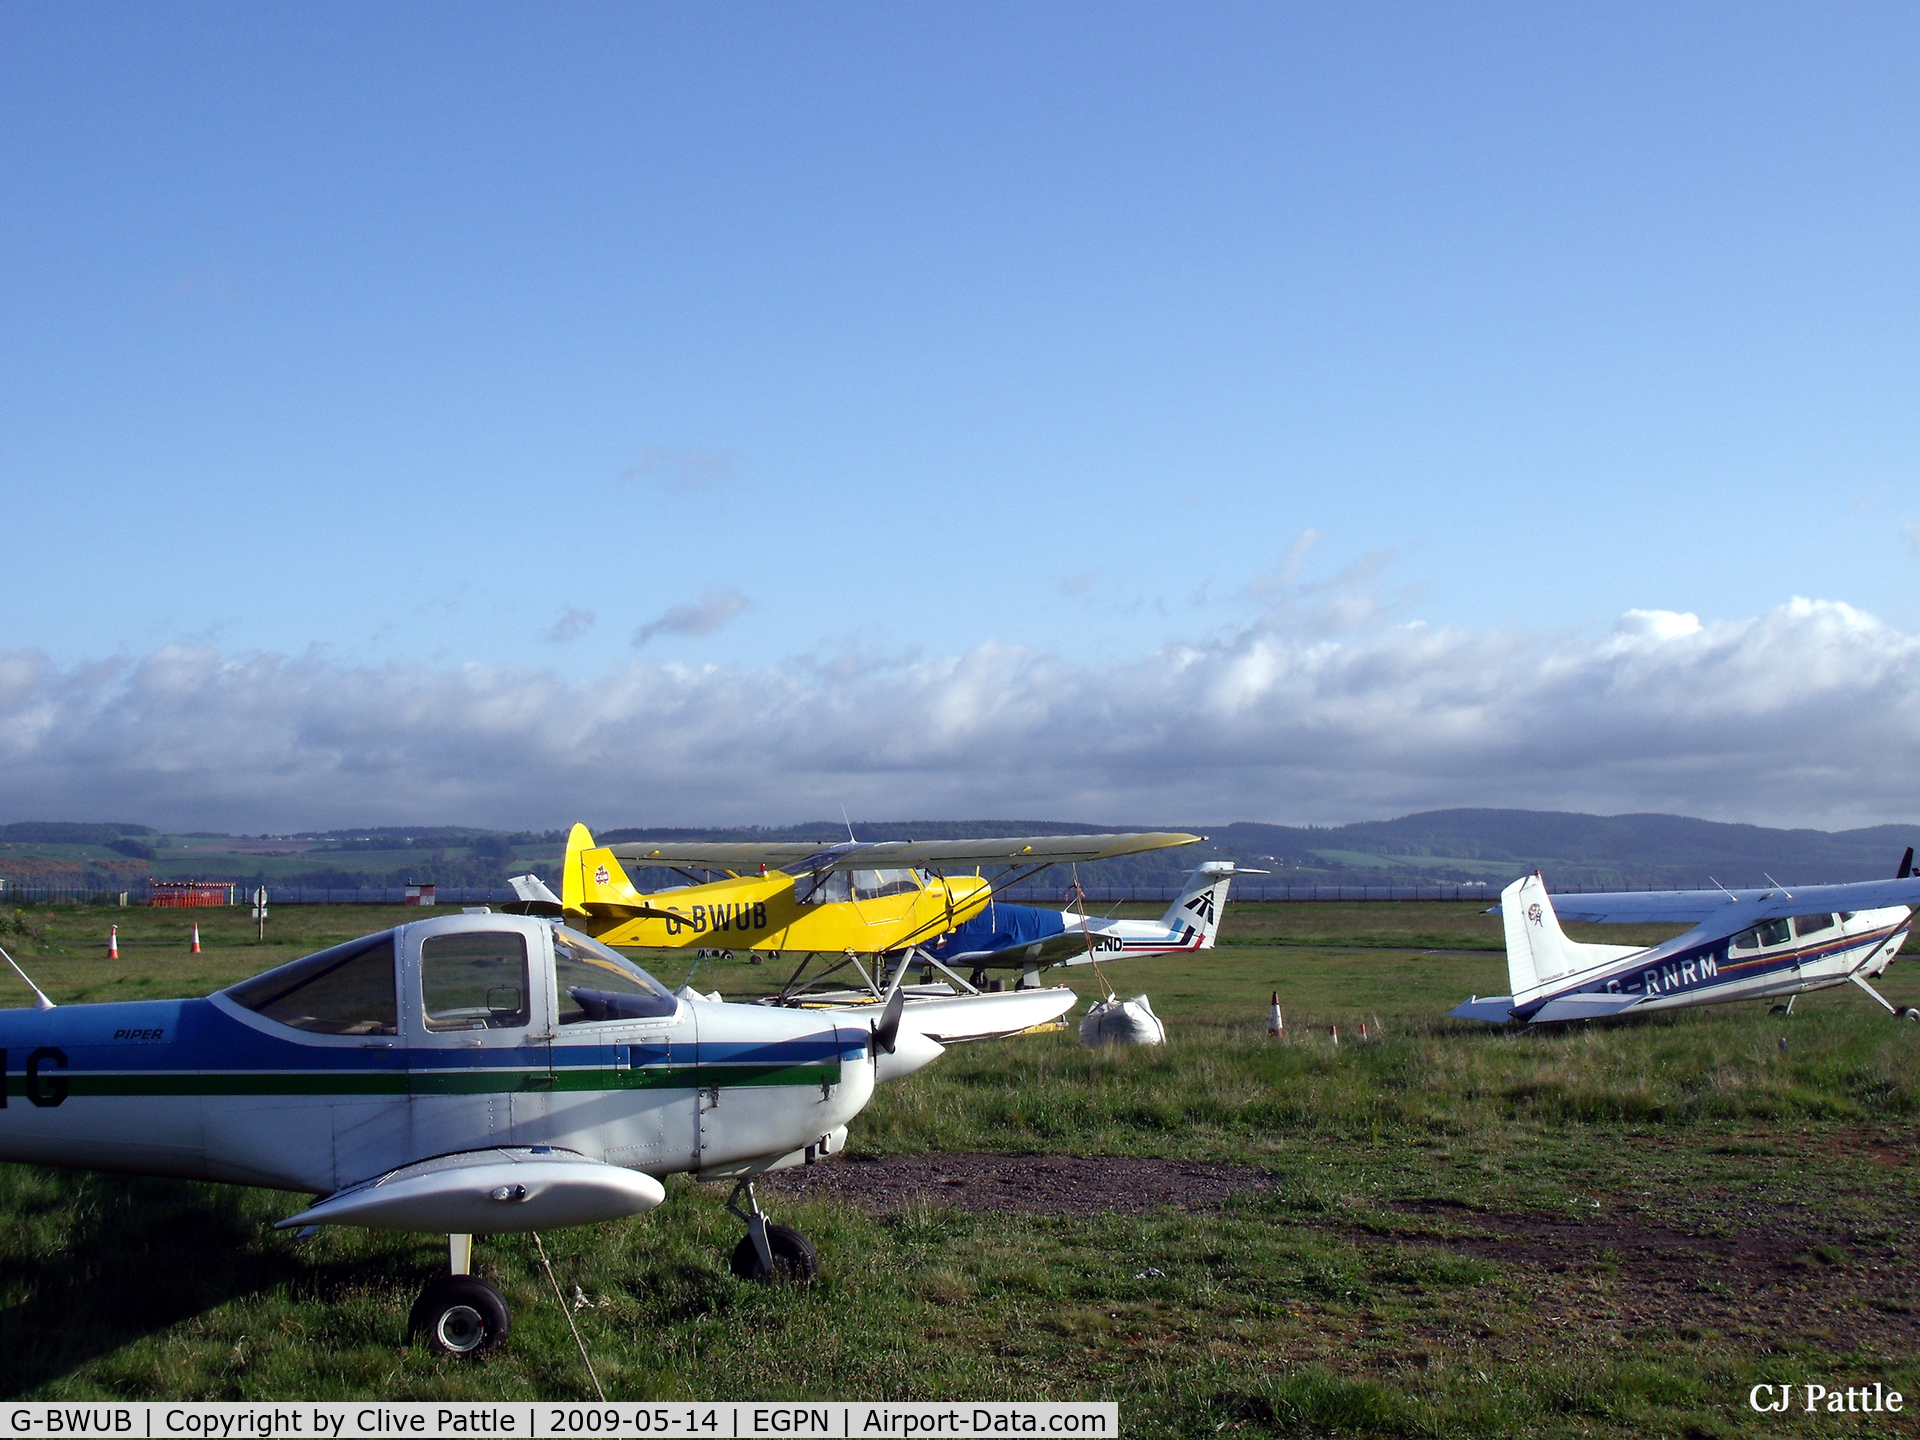 G-BWUB, 1954 Piper L-21B Super Cub C/N 18-3986, G-BWUB in amongst a varied assortment out to grass at Dundee Riverside EGPN, May 2009